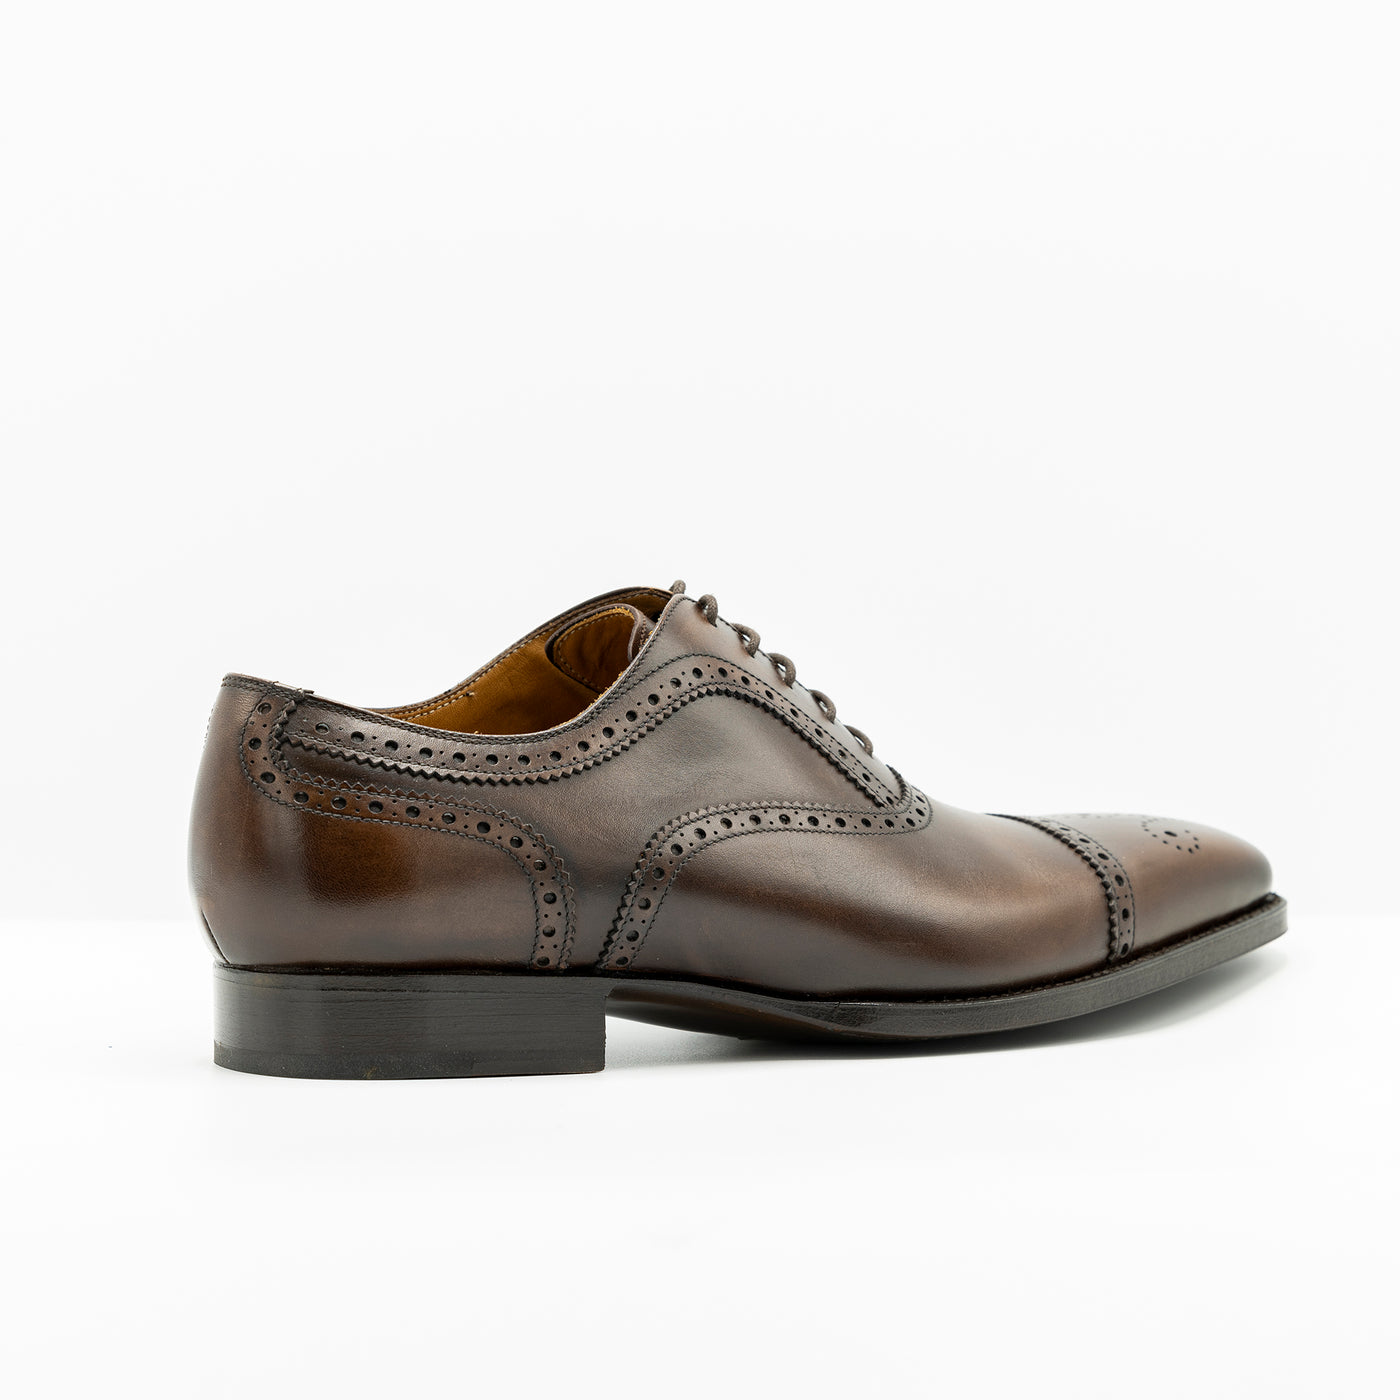 THE OXFORD in BROWN LEATHER